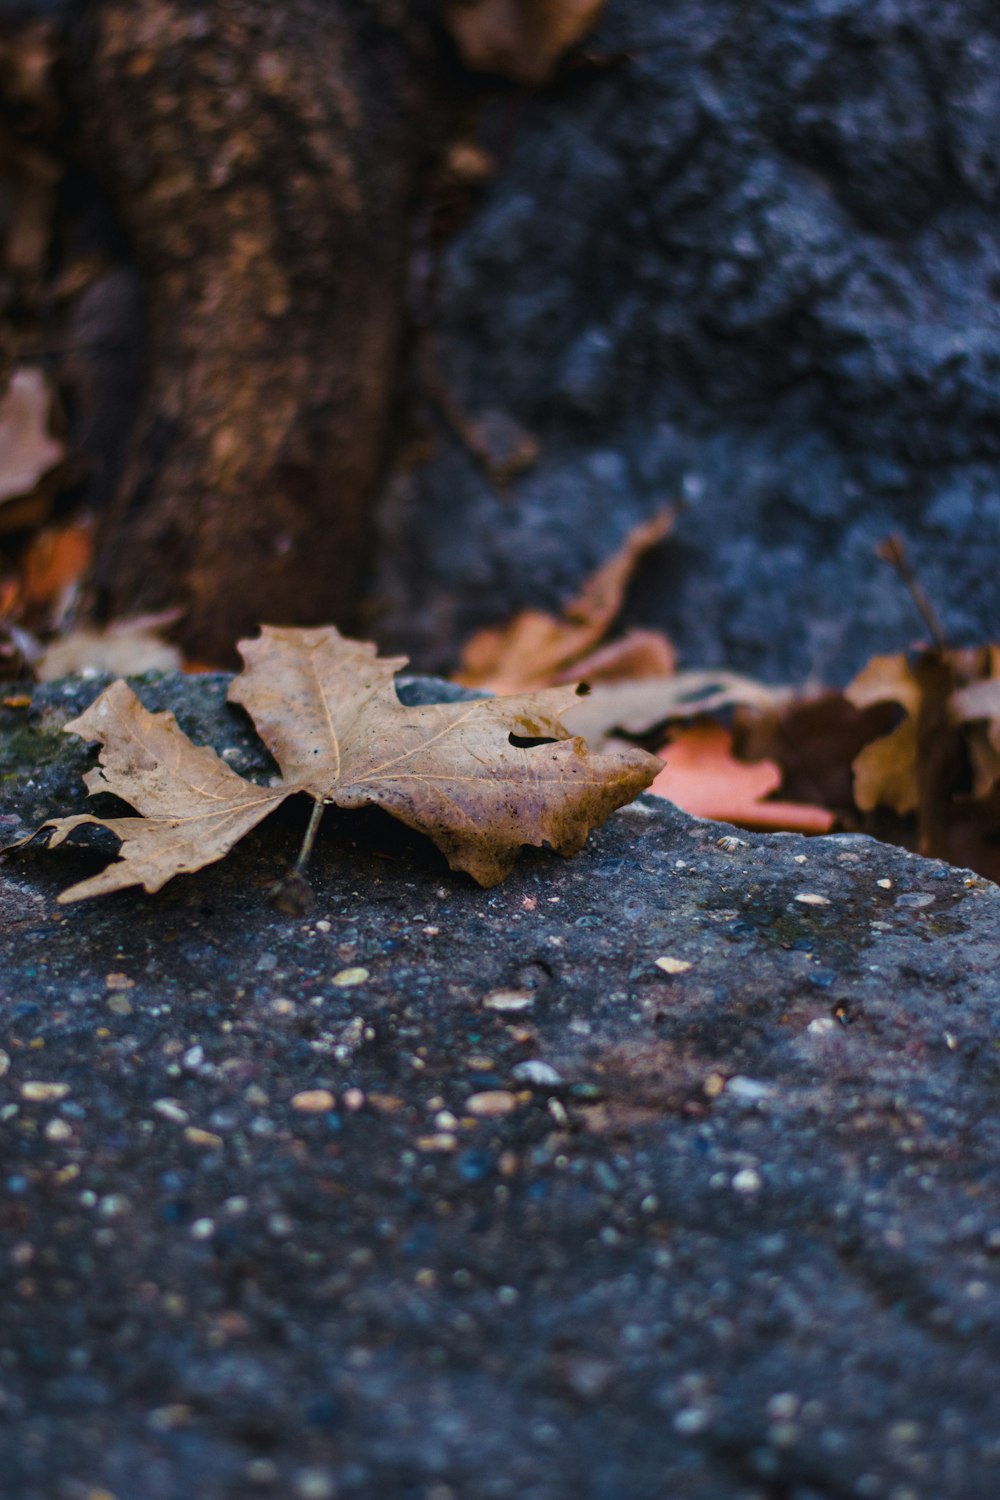 a leaf laying on a rock with a tree in the background